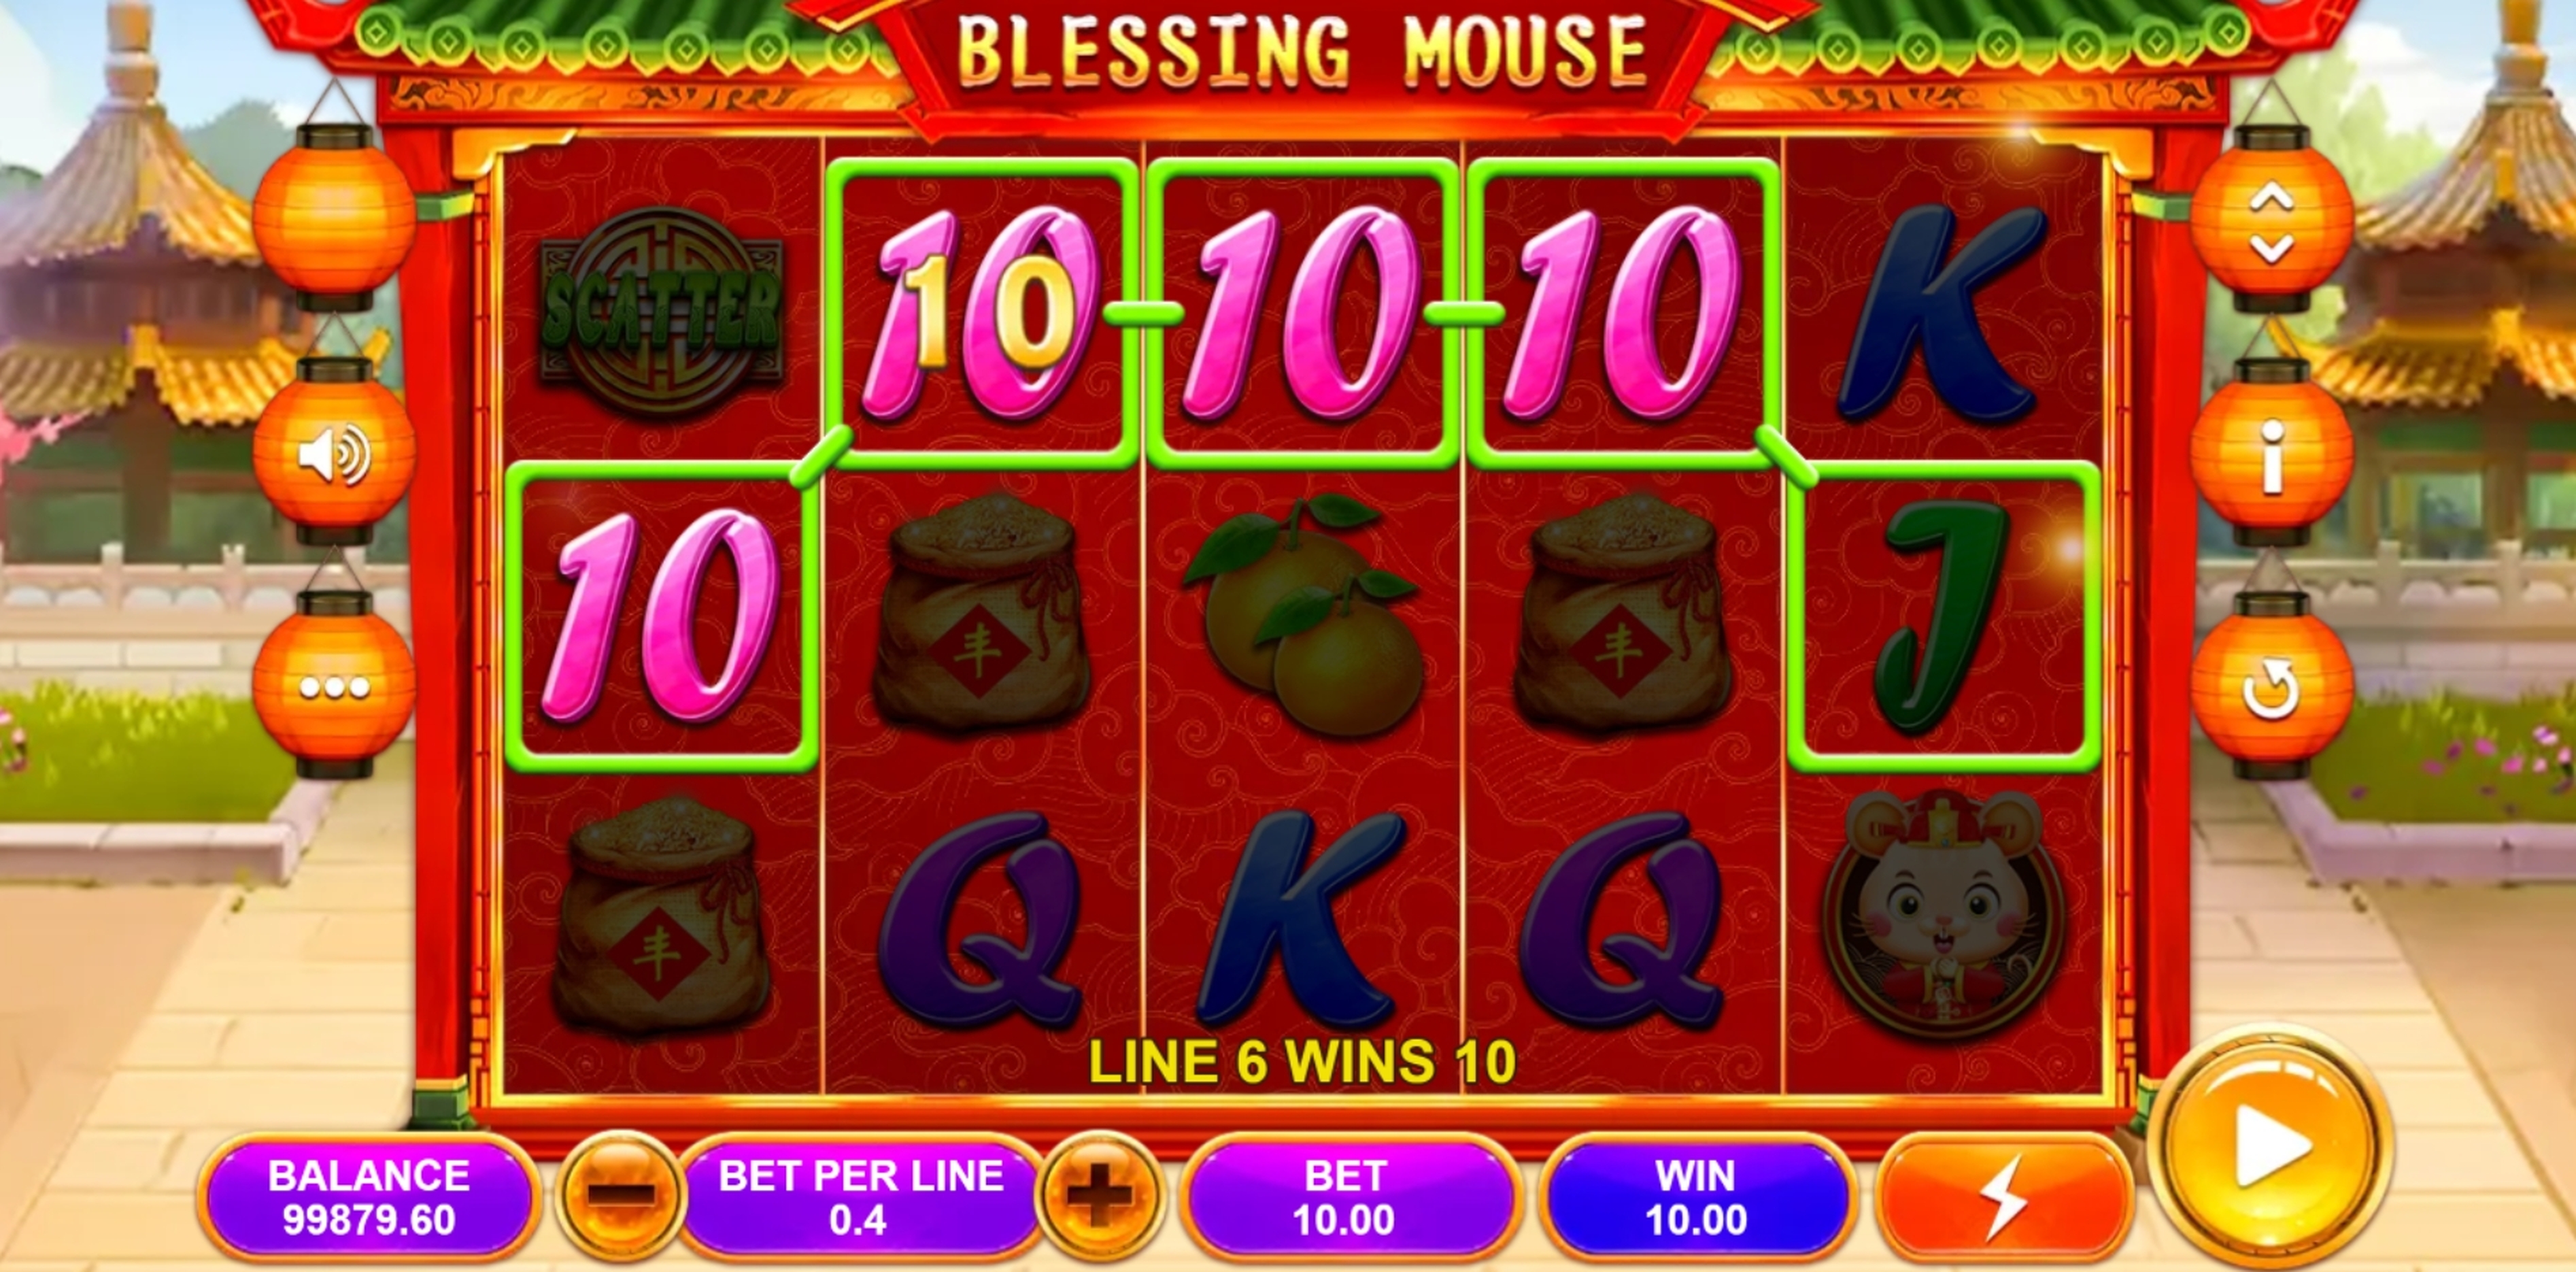 Win Money in Blessing Mouse Free Slot Game by Triple Profits Games